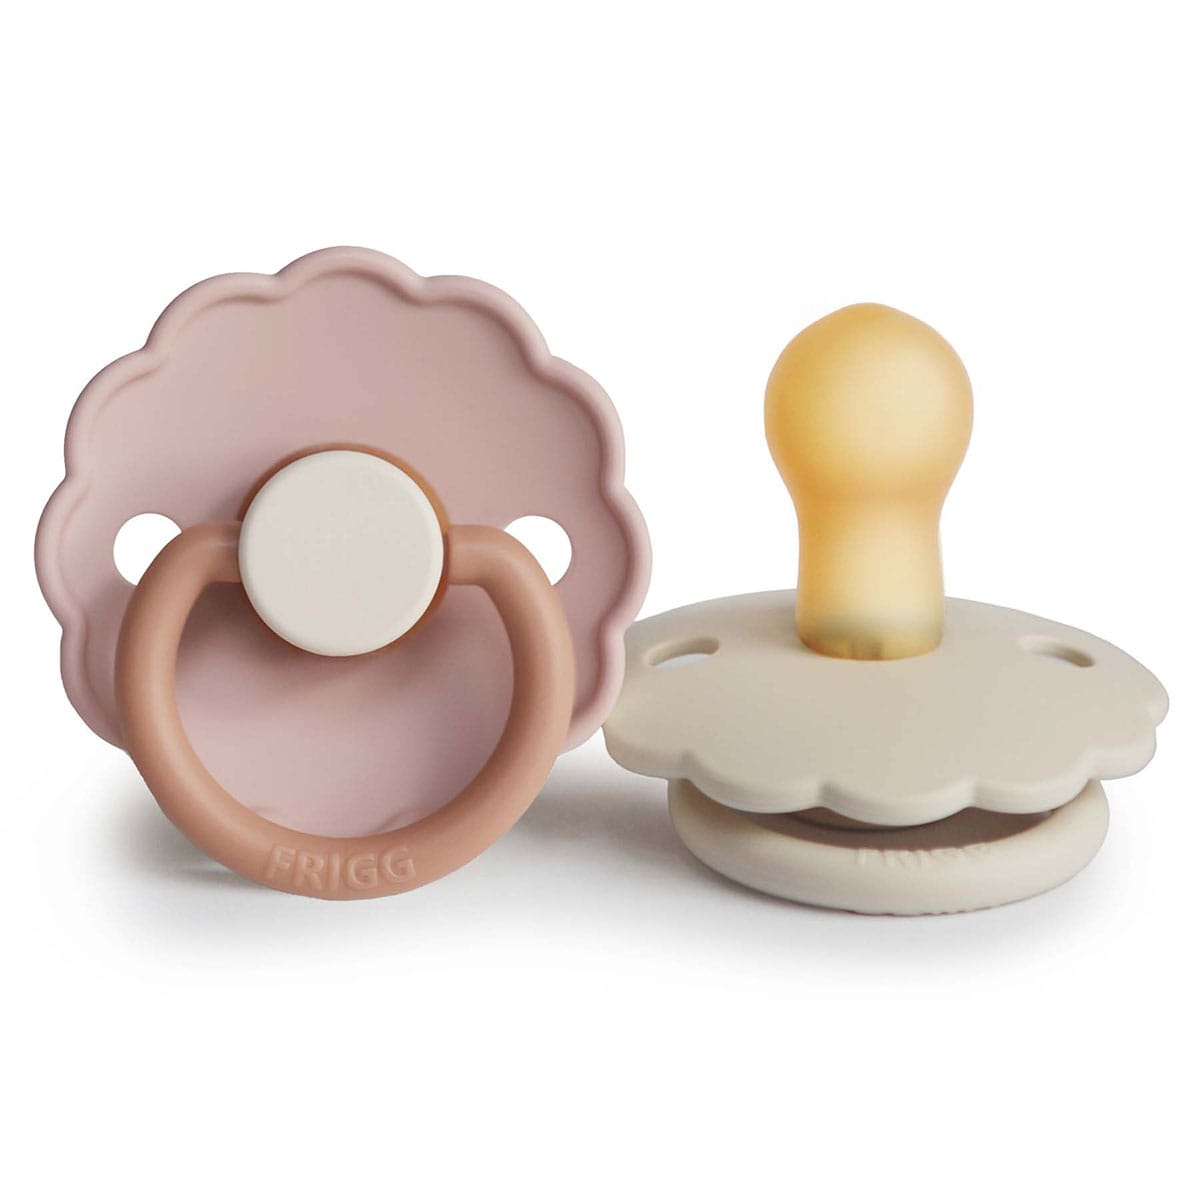 Frigg 0-6 Months Daisy Pacifier Biscuit/Cream 2 Pack